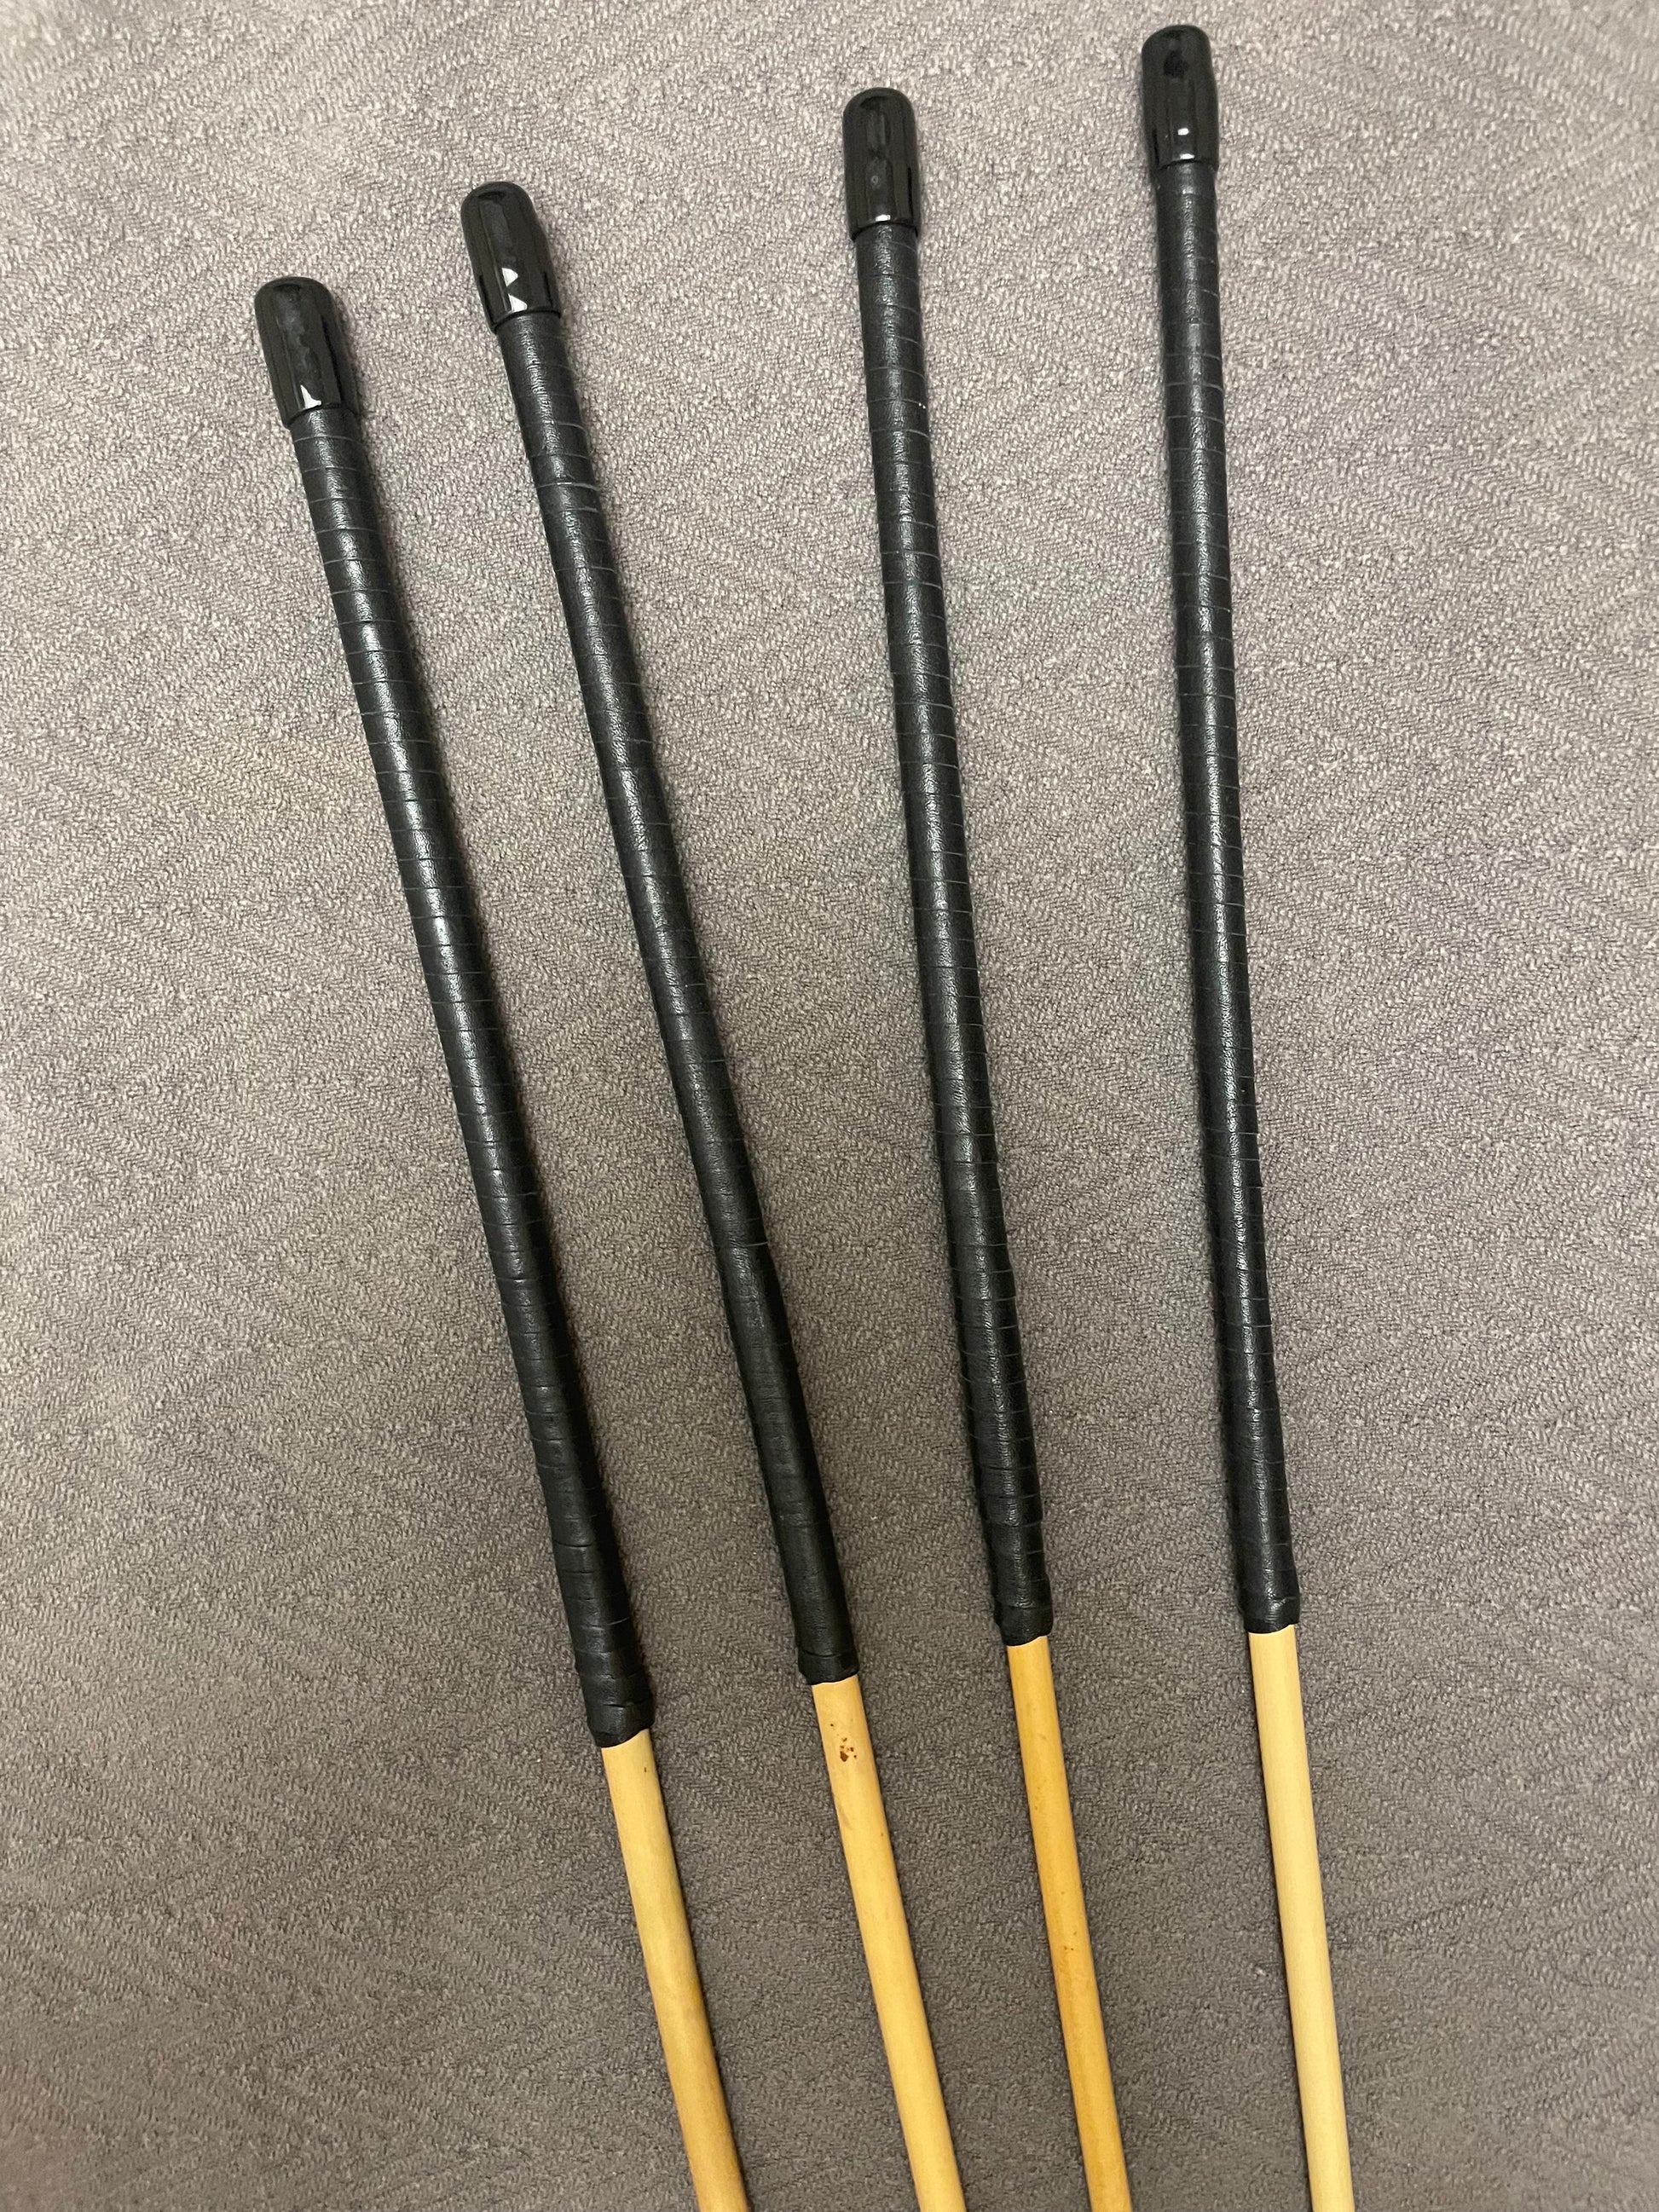 Set of 4 Knotless Dragon Canes / Ultimate Canes / No Knot Rattan Canes / BDSM Canes - 92 cms Length - Black Kangaroo Leather Handles